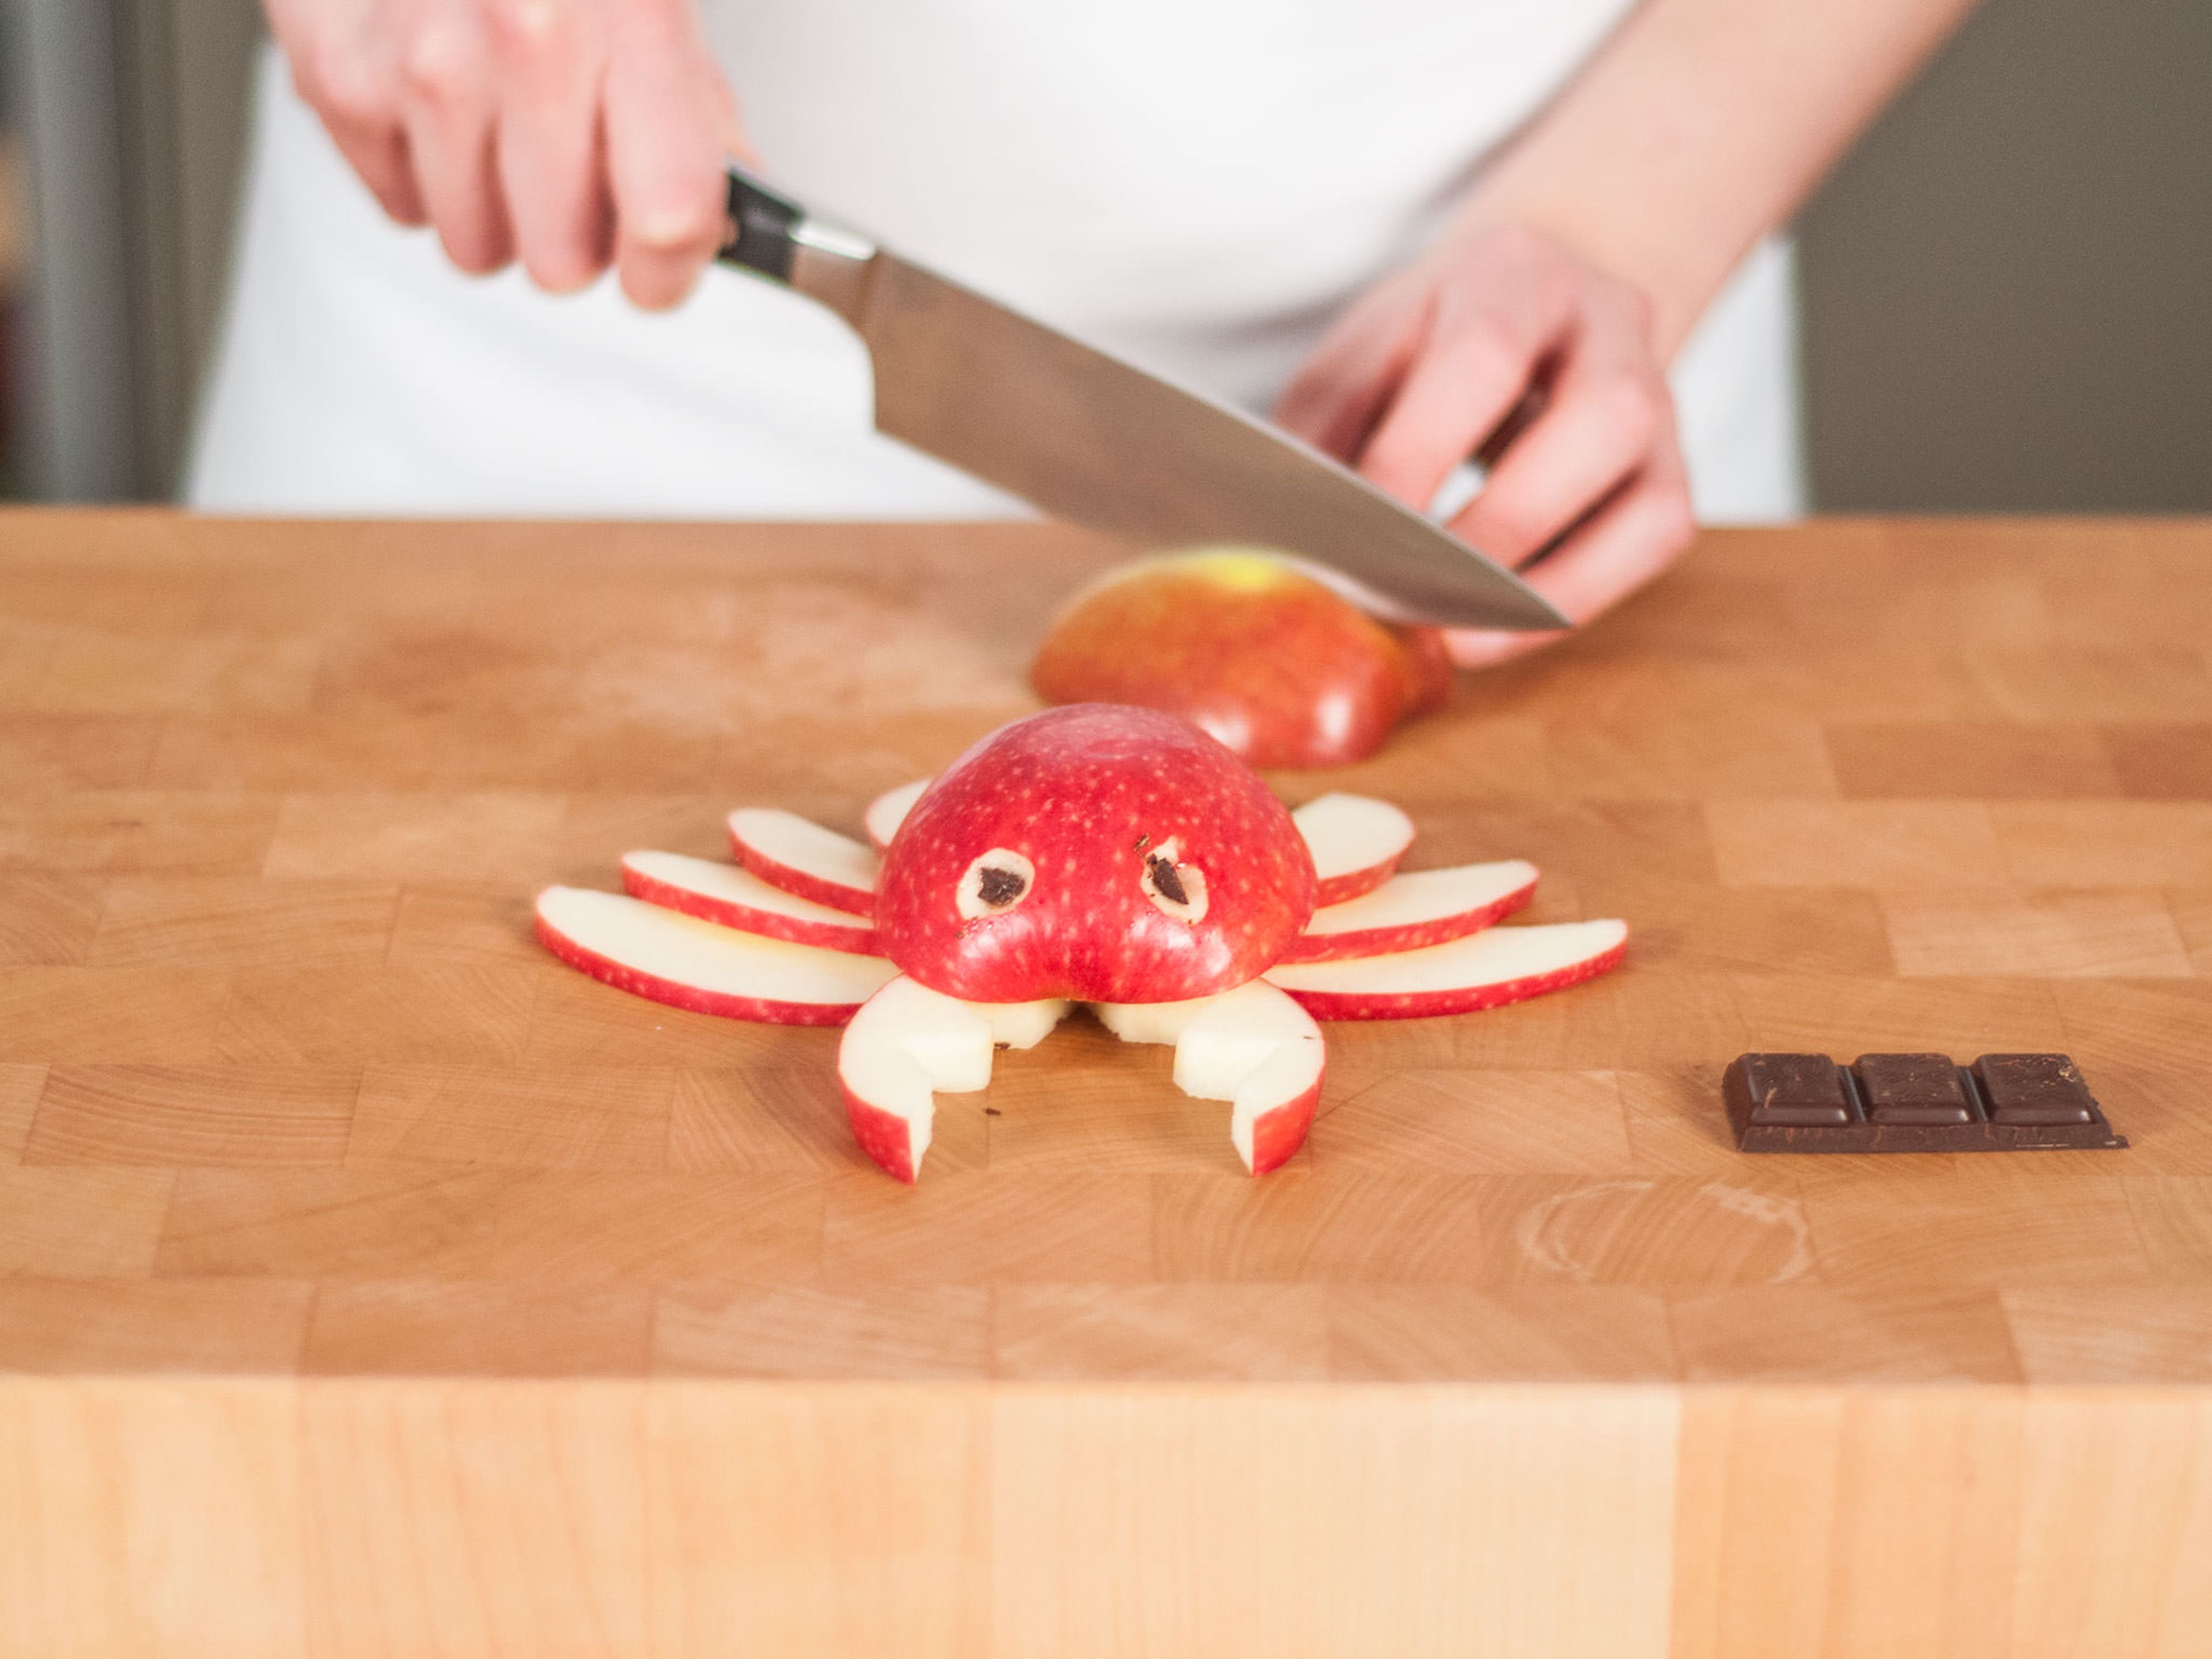 For the crab, halve one apple and cut out the core. Core and cut the other half into thin slices for legs, and cut serrated edges into two slices for the claws. Carve out small holes for the eyes, and stick small pieces of chocolate into the holes. If desired, use toothpicks to hold everything together.